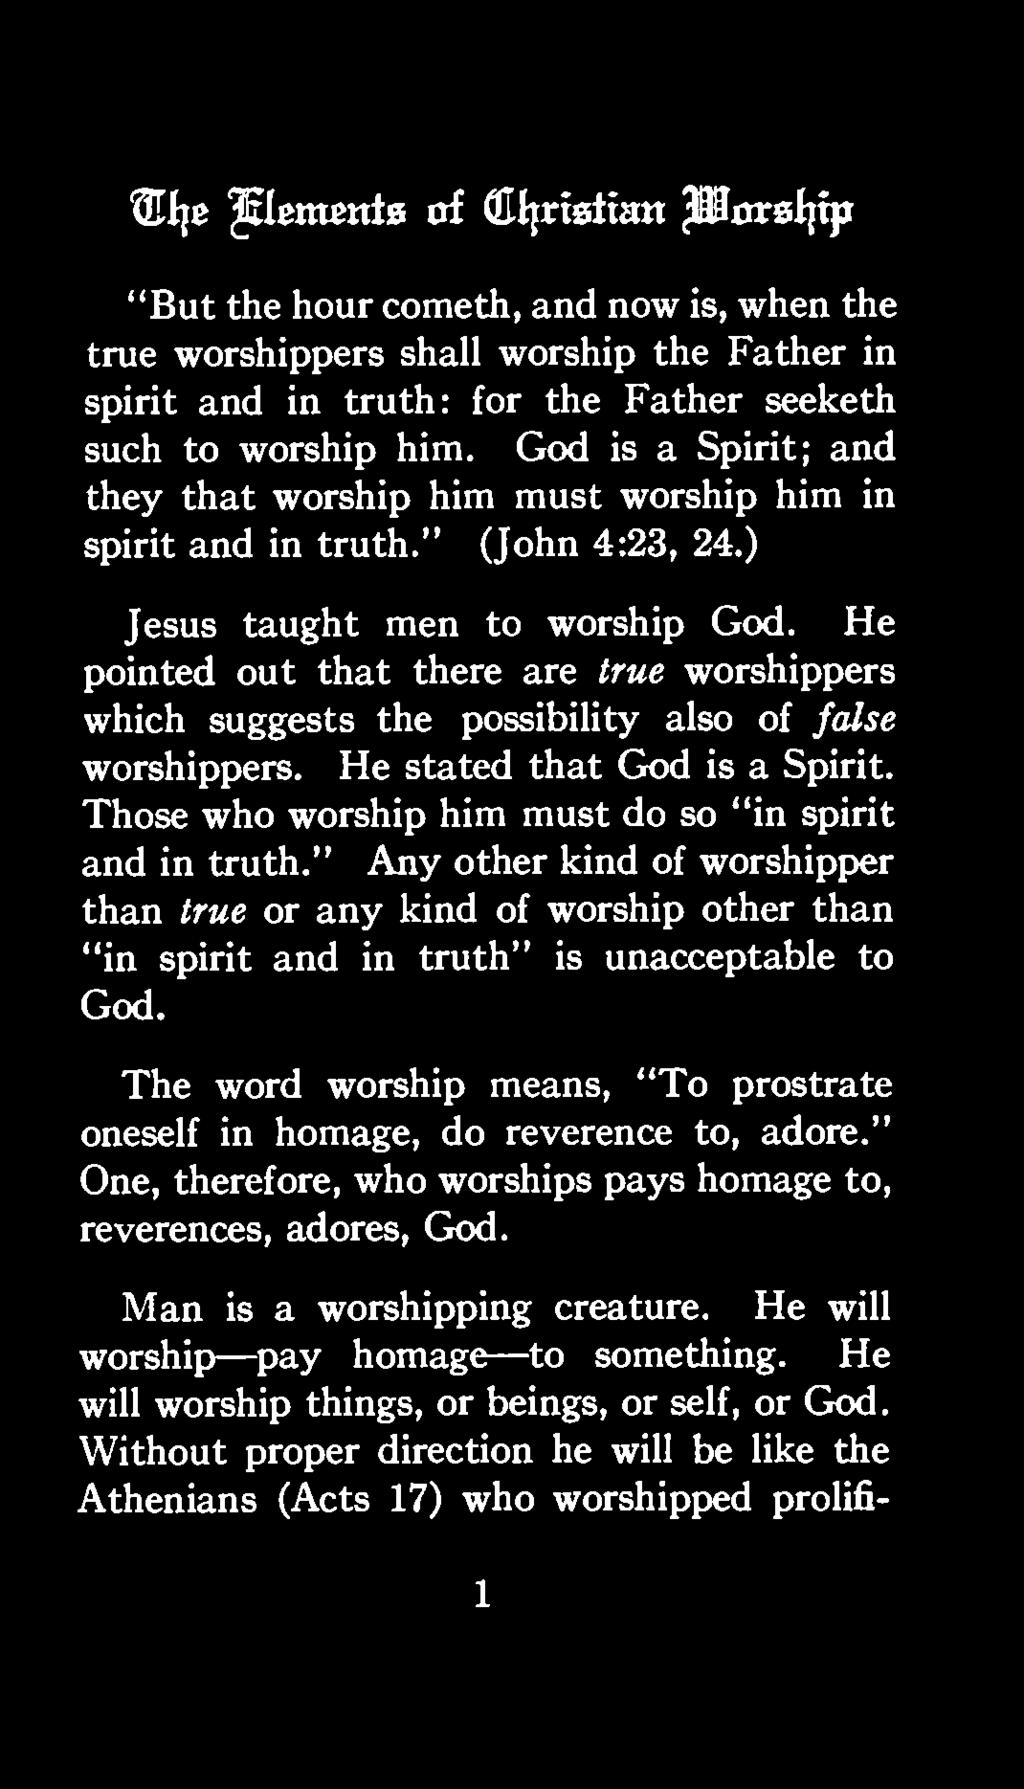 He pointed out that there are true worshippers which suggests the possibility also of false worshippers. He stated that God is a Spirit. Those who worship him must do so "in spirit and in truth.